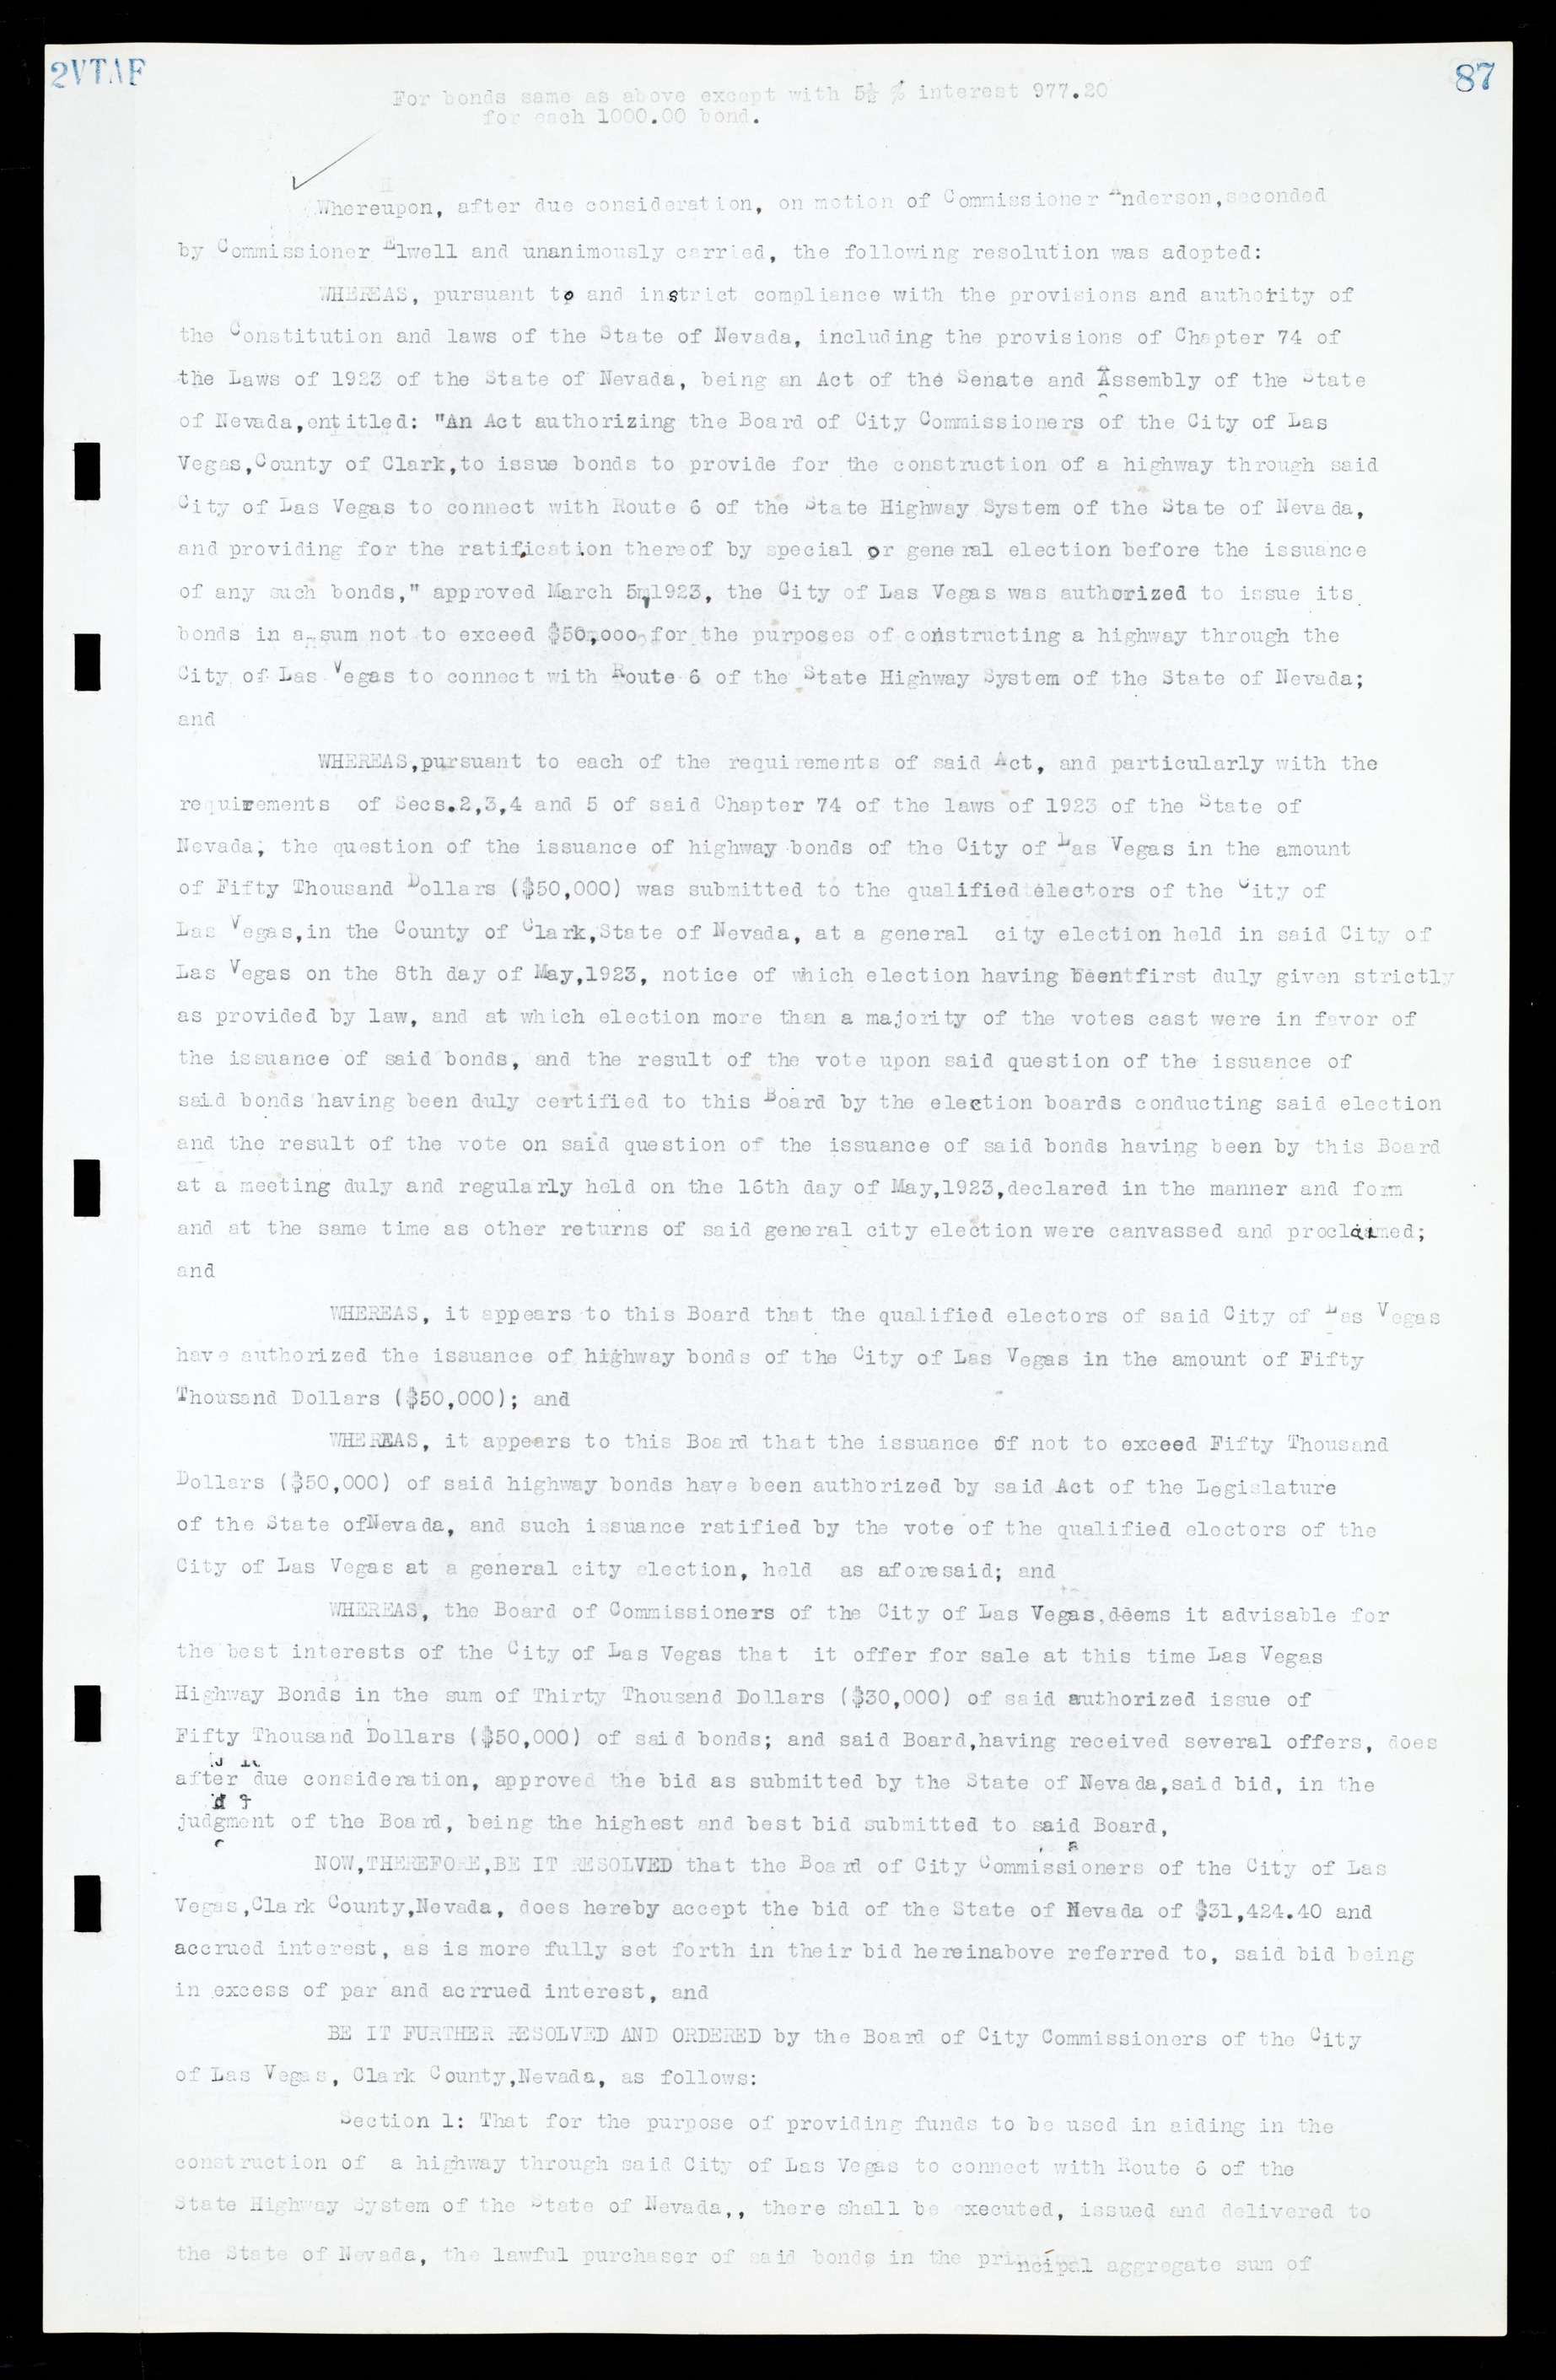 Las Vegas City Commission Minutes, March 1, 1922 to May 10, 1929, lvc000002-94